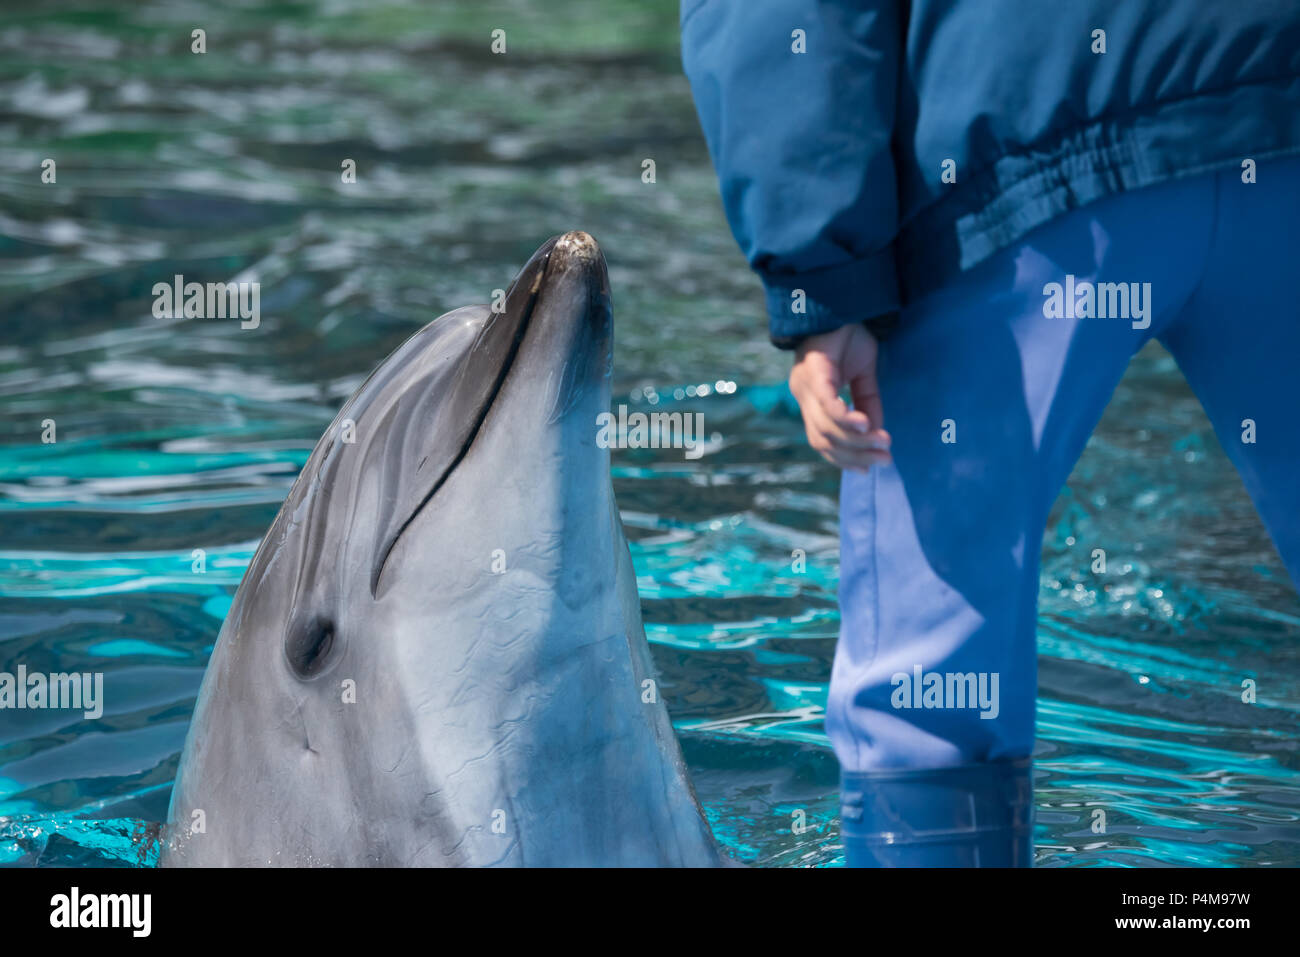 A Bottlenose Dolphin interacts with its trainer at the Port of Nagoya Public Aquarium in Nagoya, Japan. Stock Photo